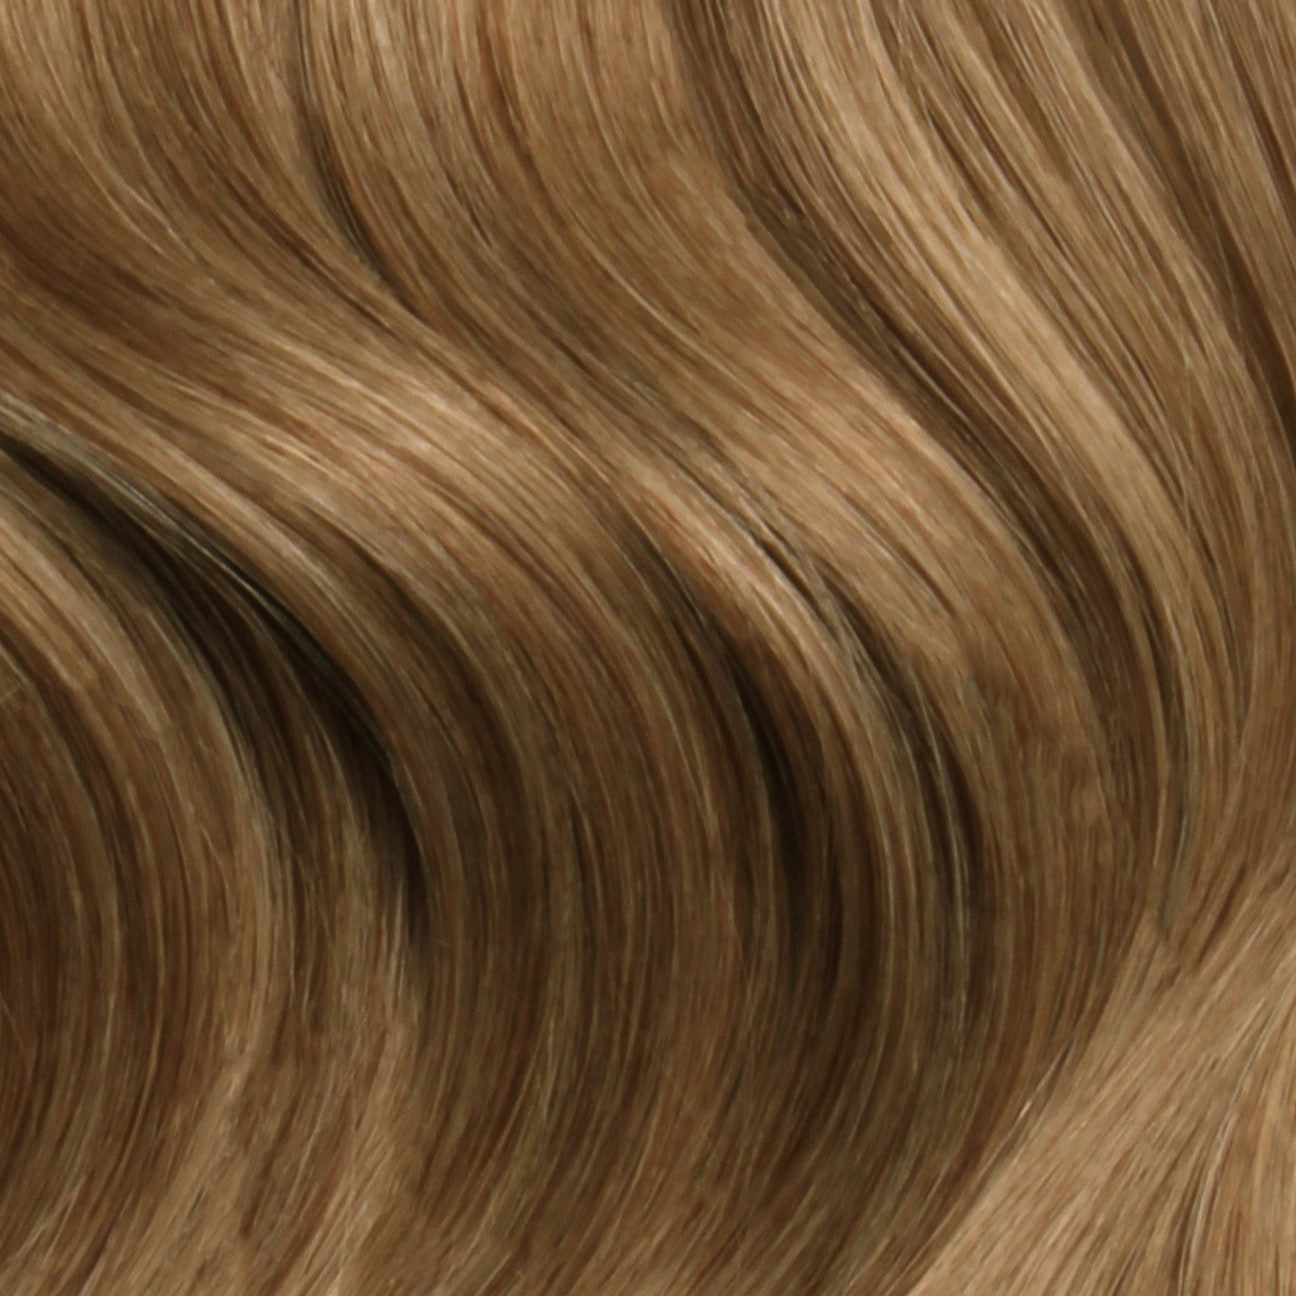 Nano Bonds 20 Inches - SWAY Hair Extensions Chestnut-Blonde-Mix-6-24 Ultra-fine, invisible bonds for a flawless, natural look. 100% Remy Human hair, lightweight and versatile. Reusable and perfect for individual or salon use.